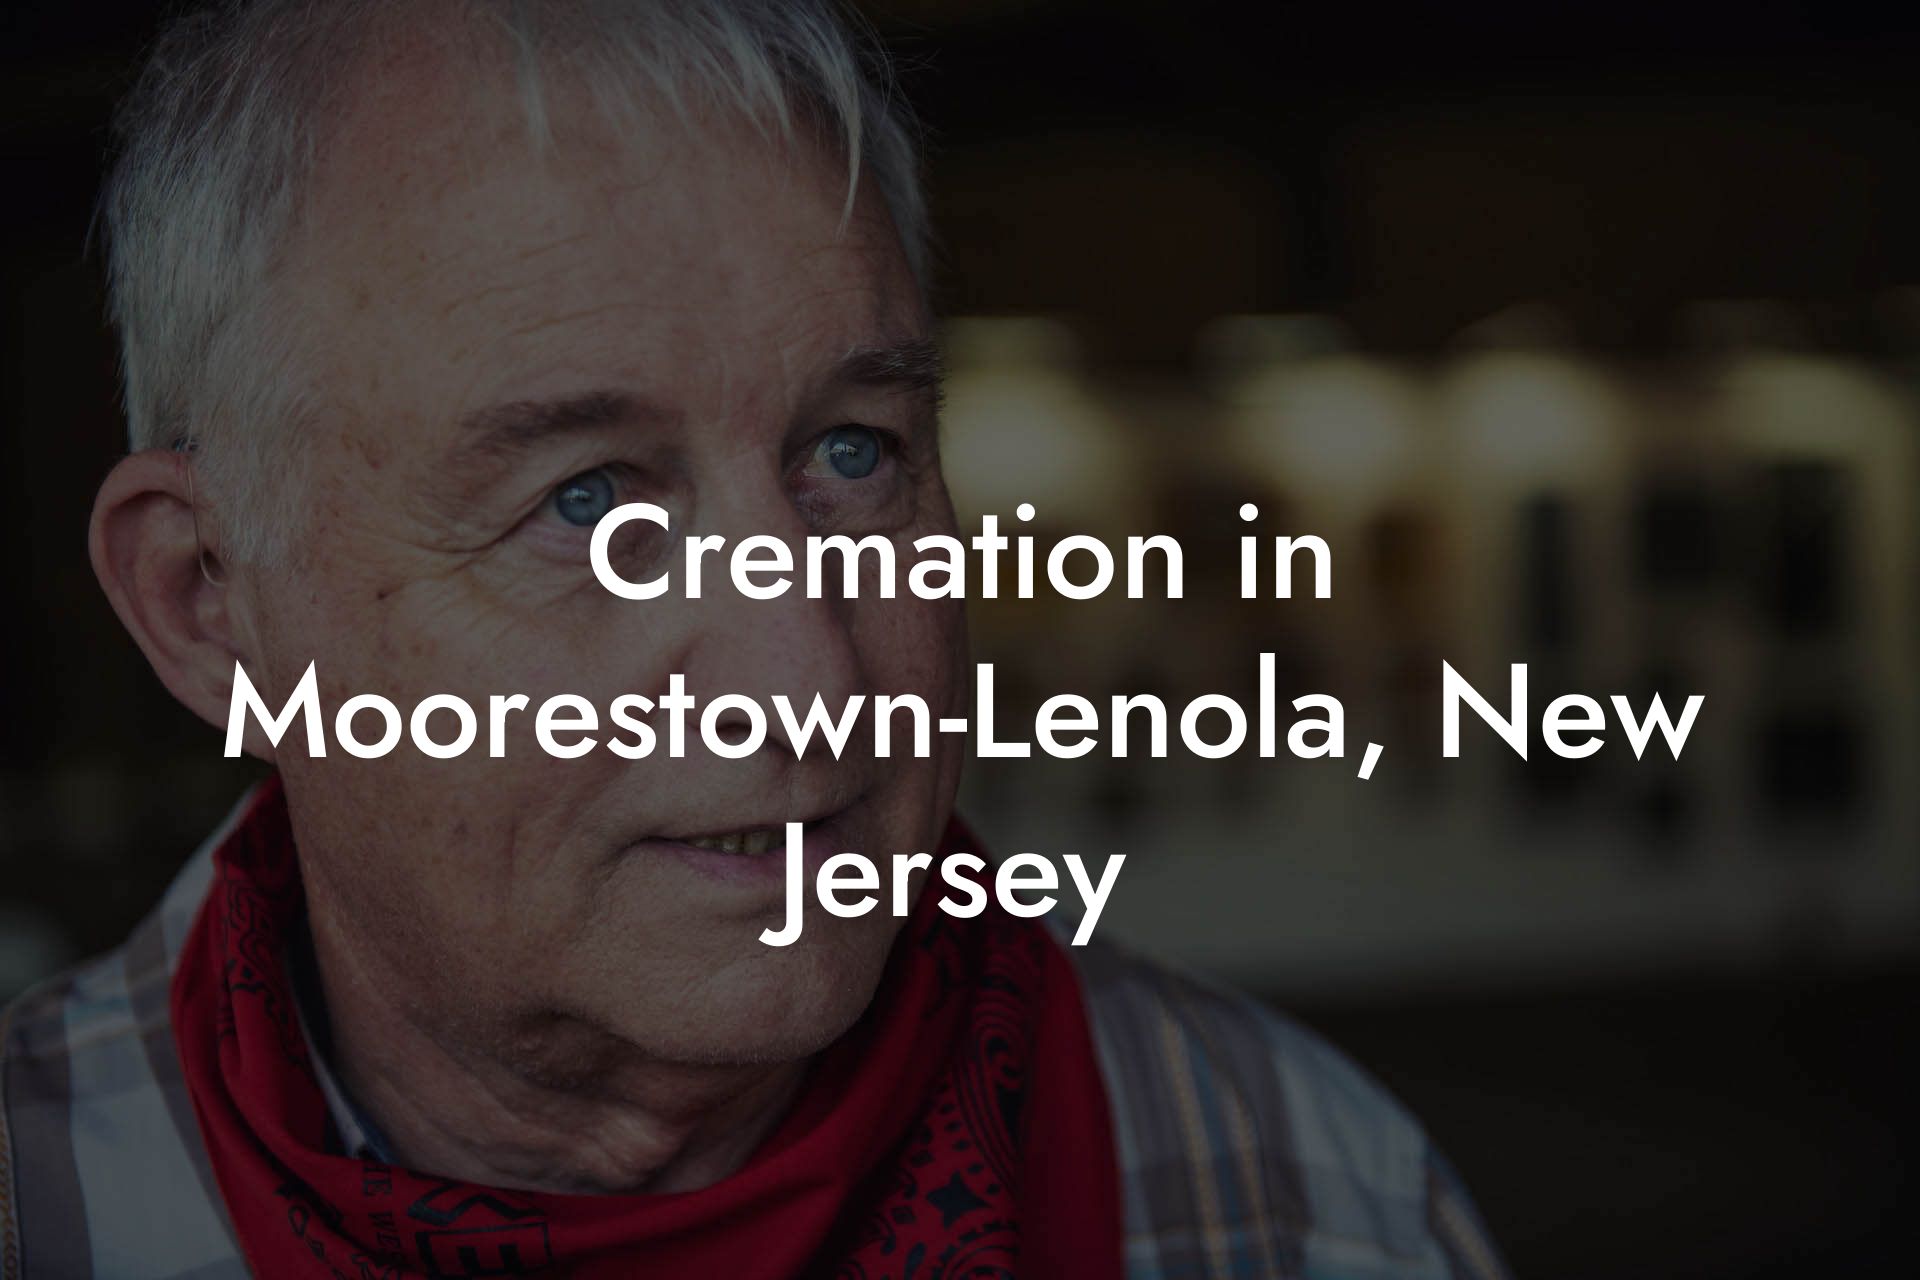 Cremation in Moorestown-Lenola, New Jersey